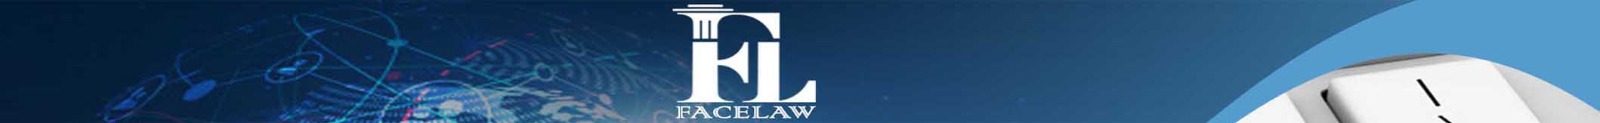 list of litigation lawyers in canada